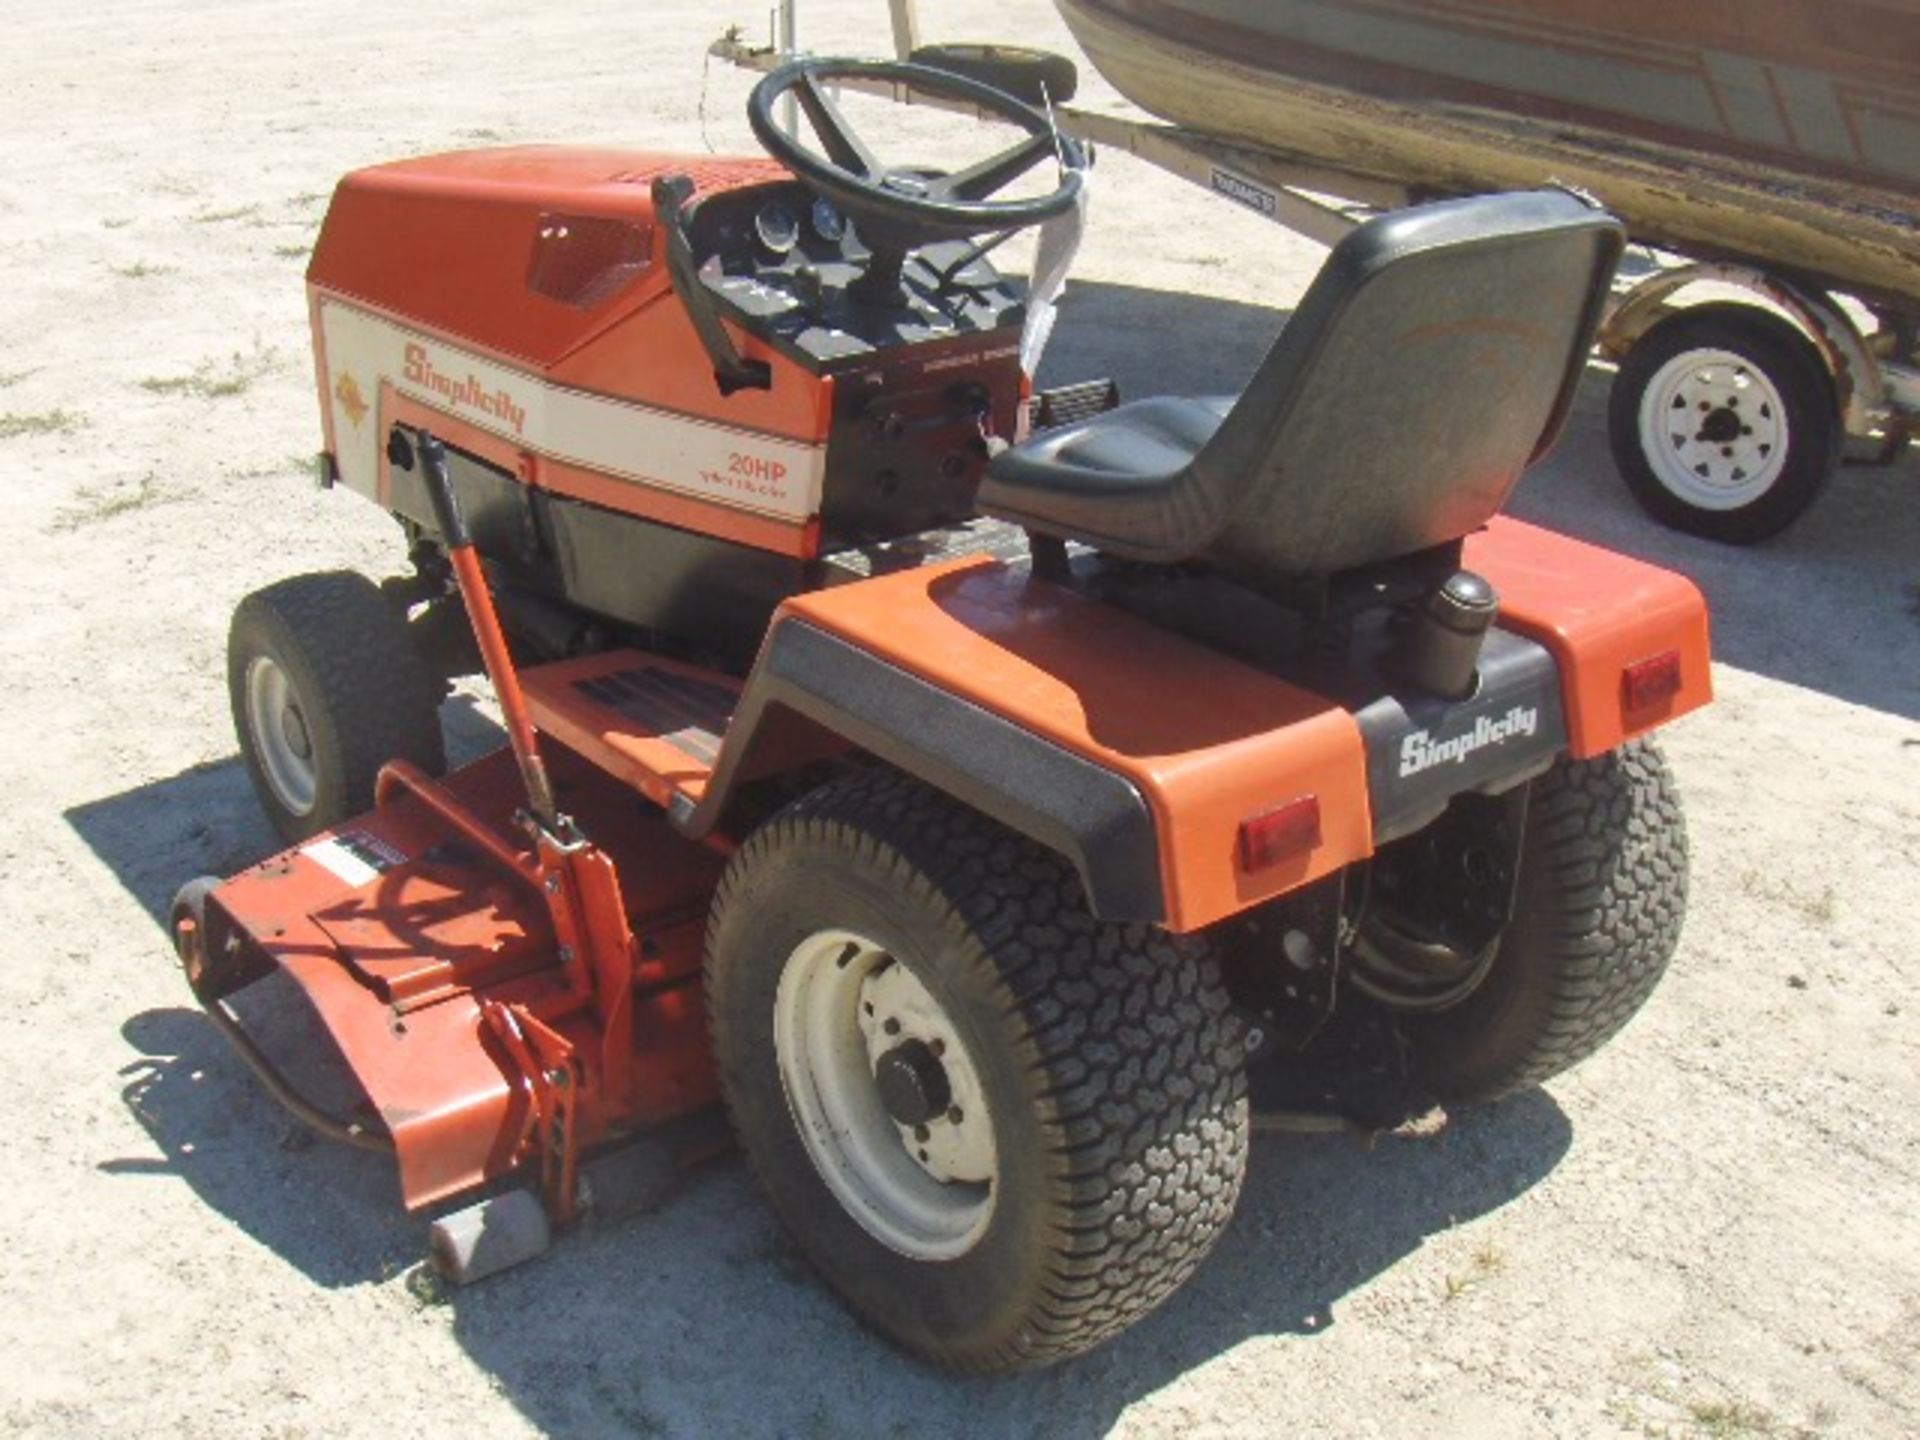 1980 'S SIMPLICITY 20HP SUN STAR SUN STAR  1692454 garden tractor, electric start and reverse, - Image 2 of 2